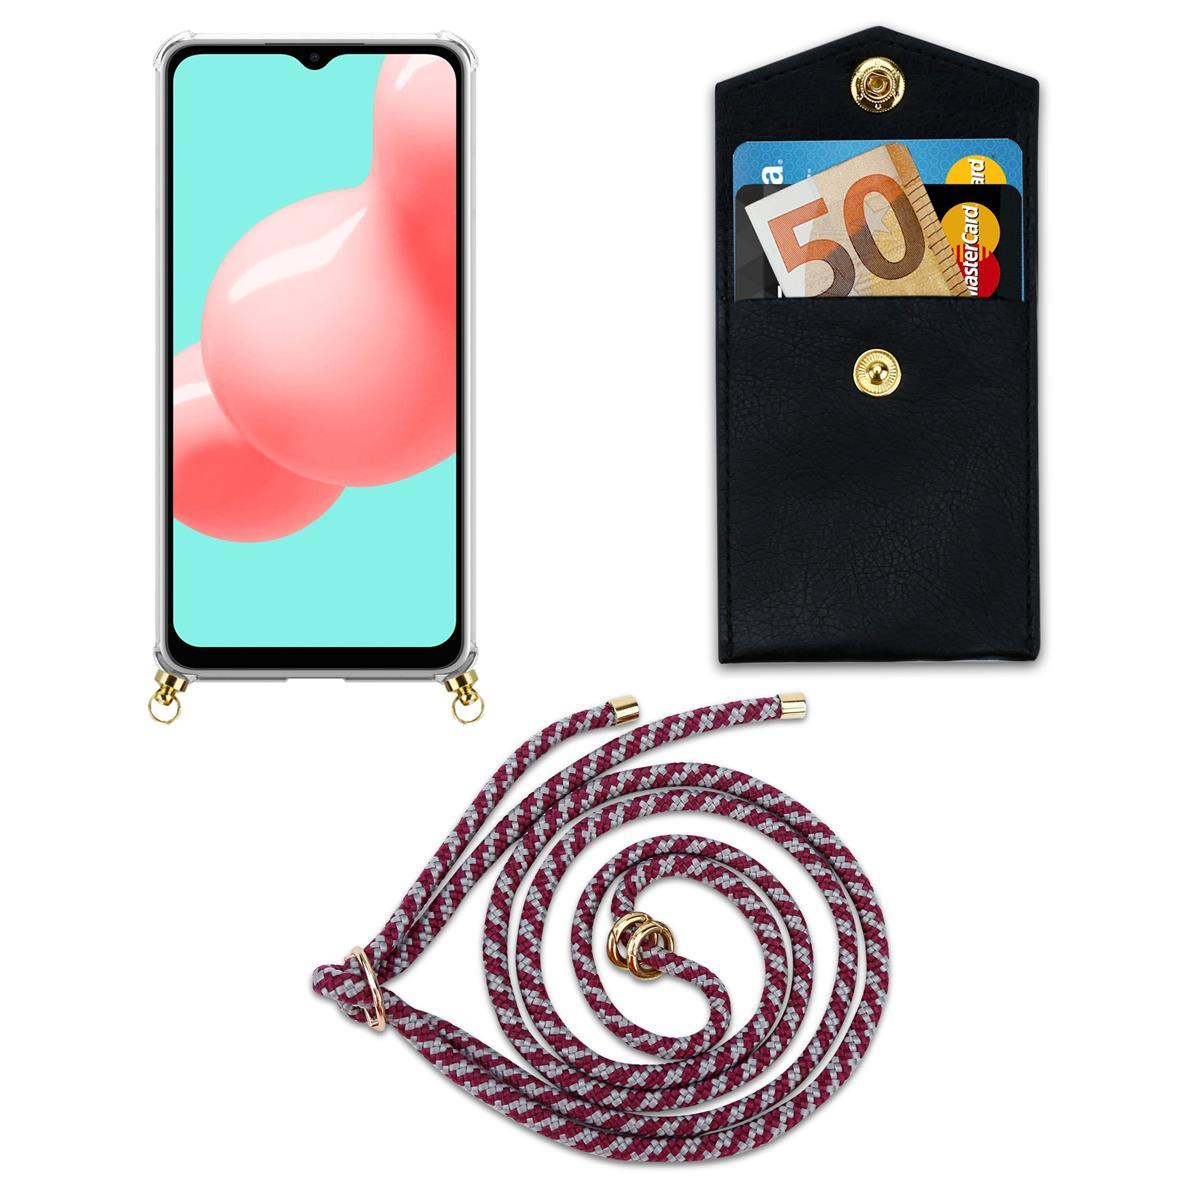 CADORABO Handy Kette mit Gold Samsung, Band Ringen, A32 Backcover, 4G, und Kordel WEIß ROT abnehmbarer Hülle, Galaxy